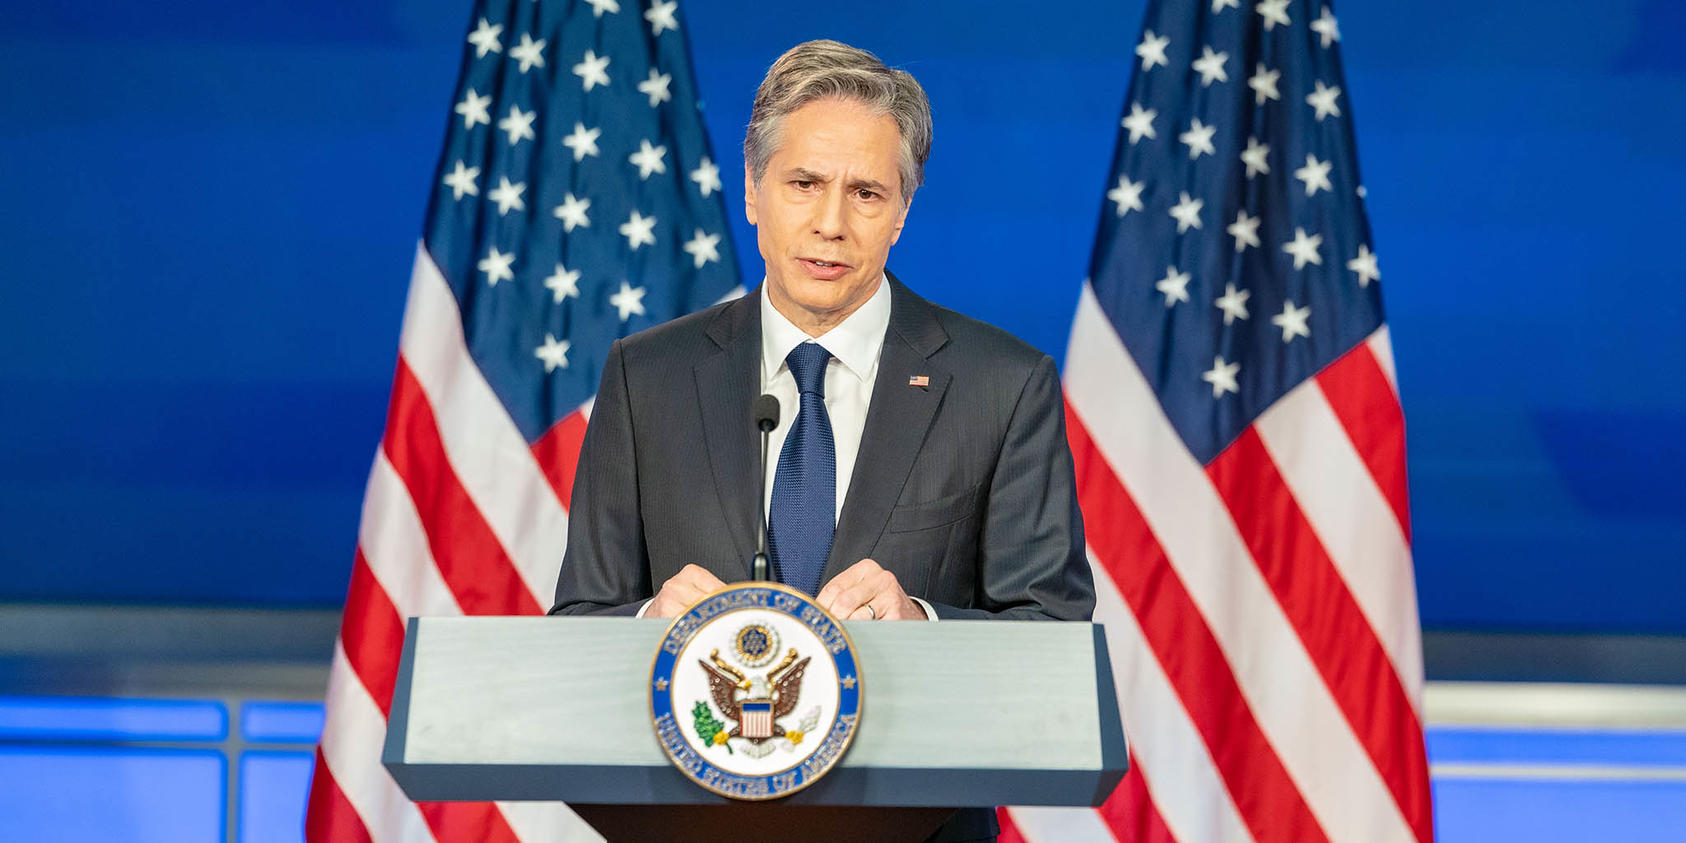 Secretary of State Antony J. Blinken delivers an address outlining the administration’s policy toward the People’s Republic of China, at the George Washington University in Washington, D.C., May 26, 2022. (Freddie Everett/U.S. State Department)